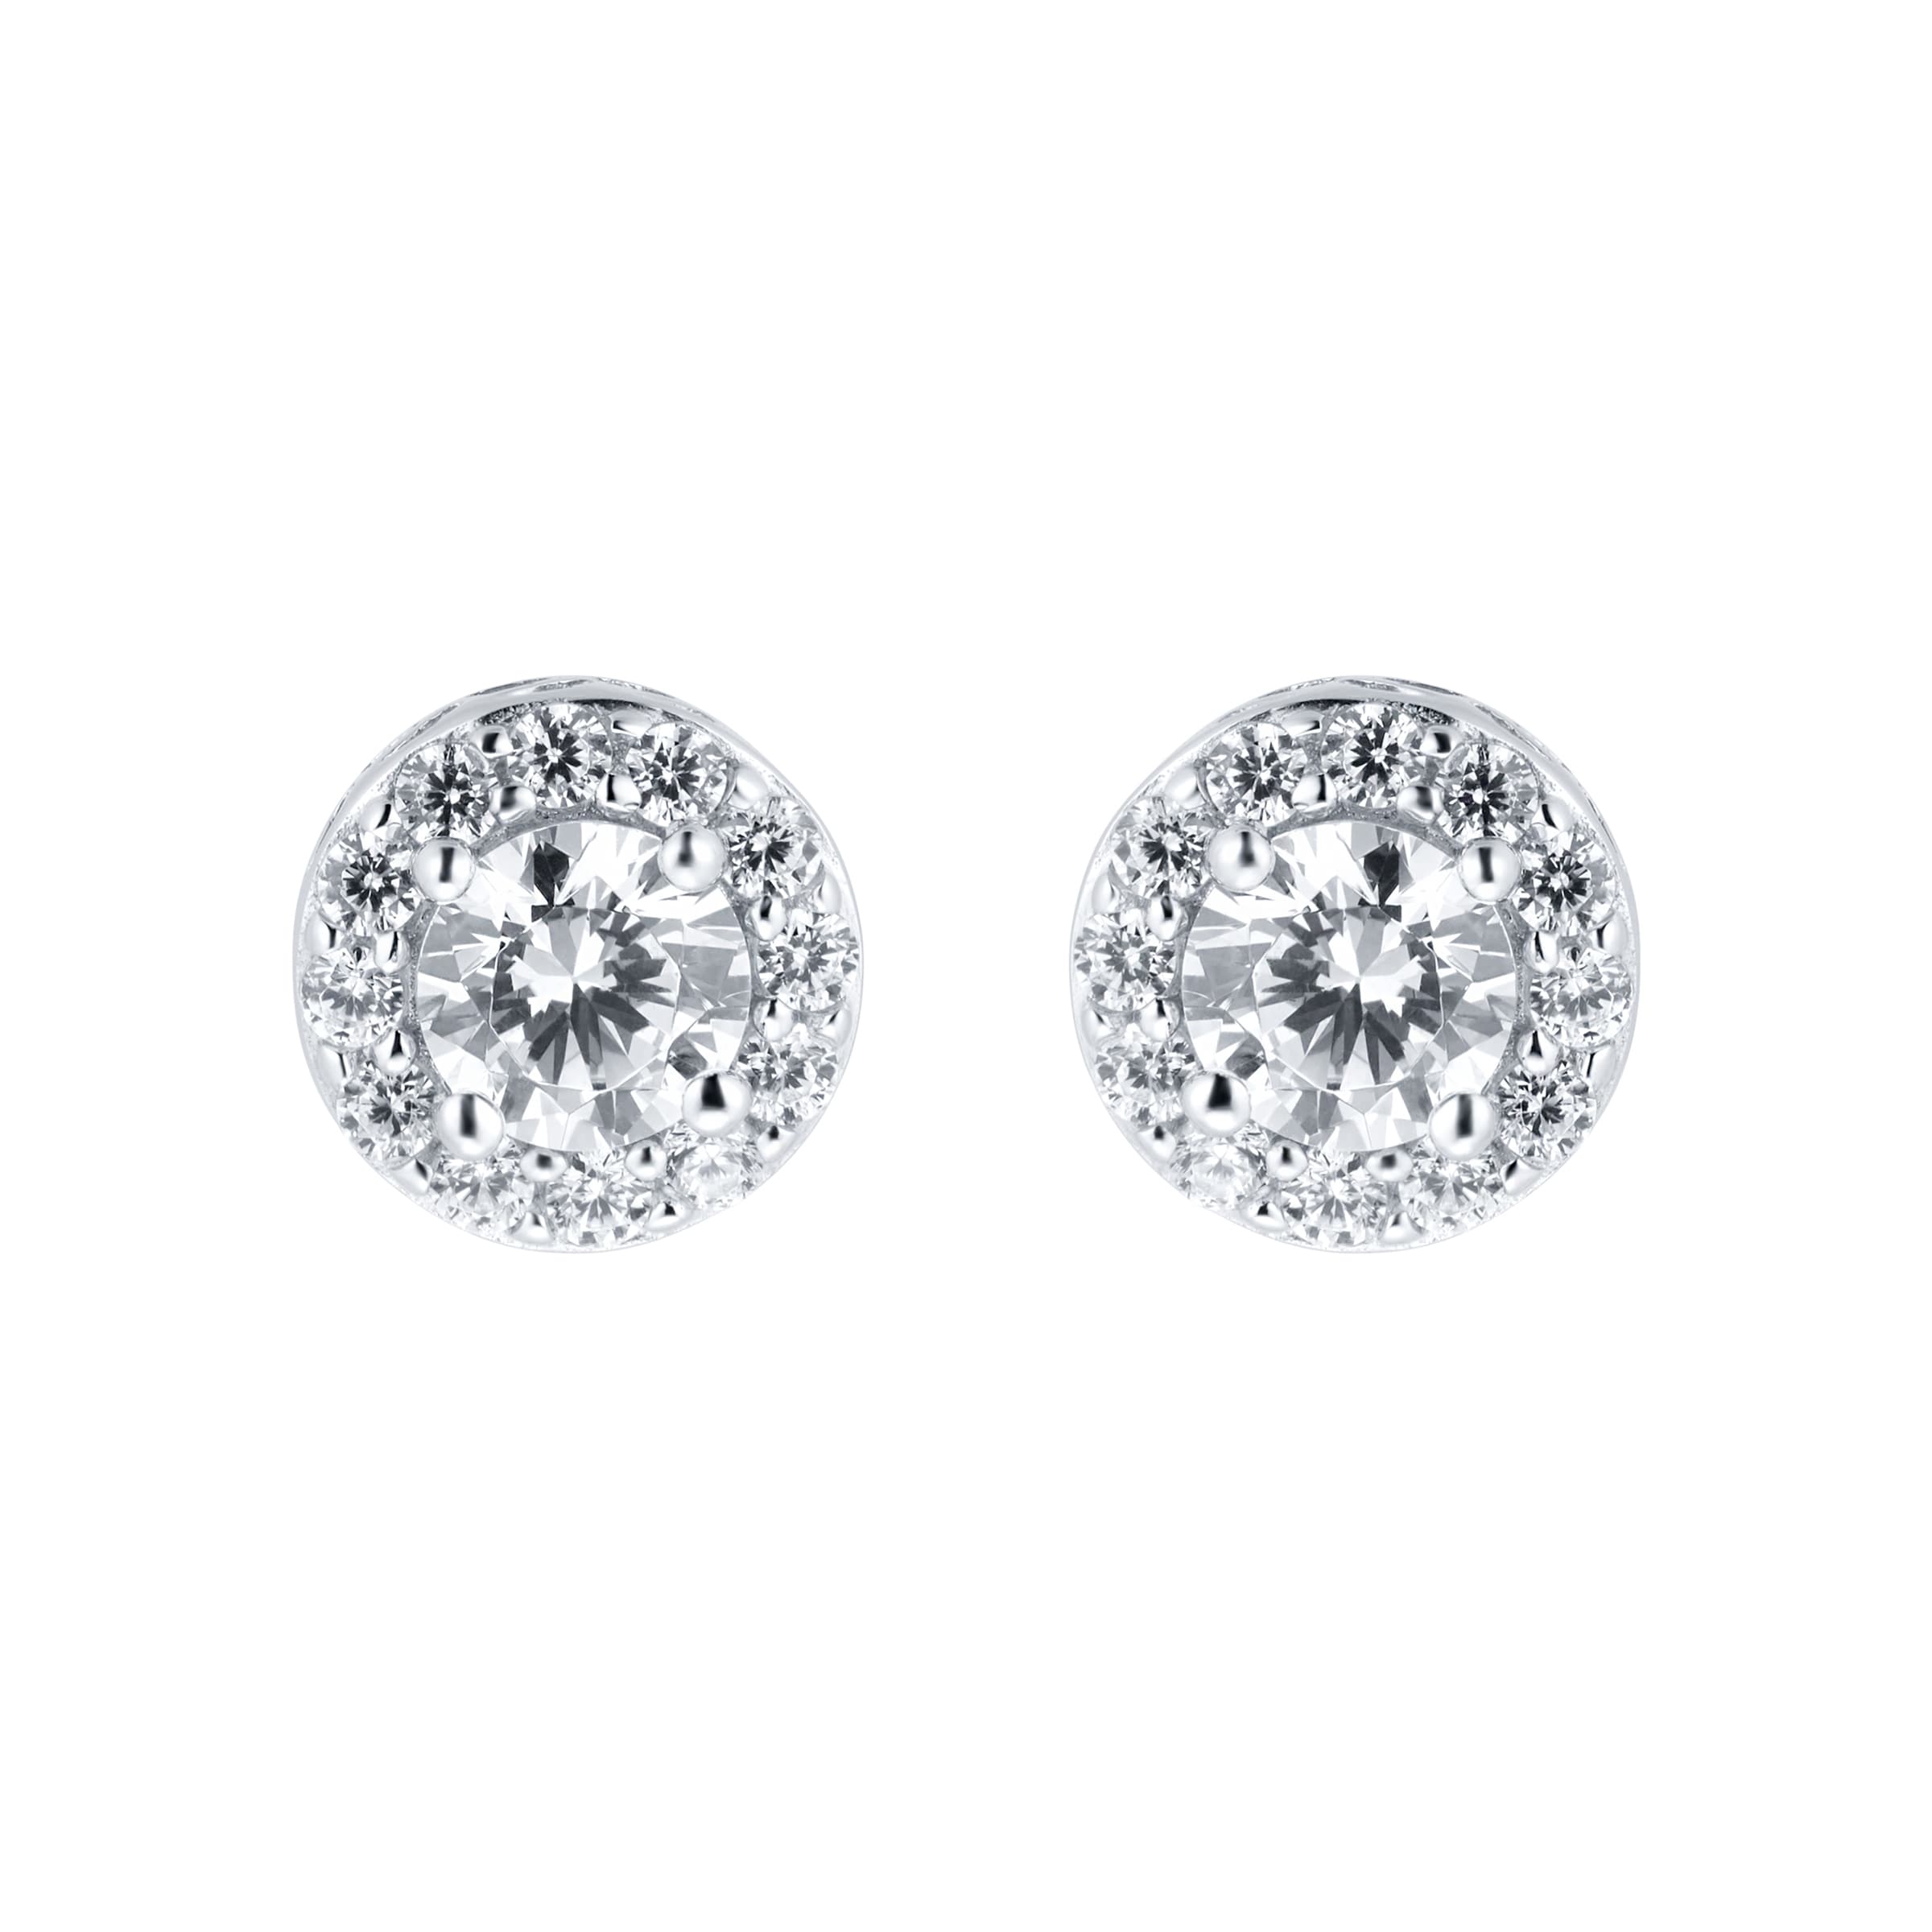 9ct White Gold Cubic Zirconia Halo Stud Earrings